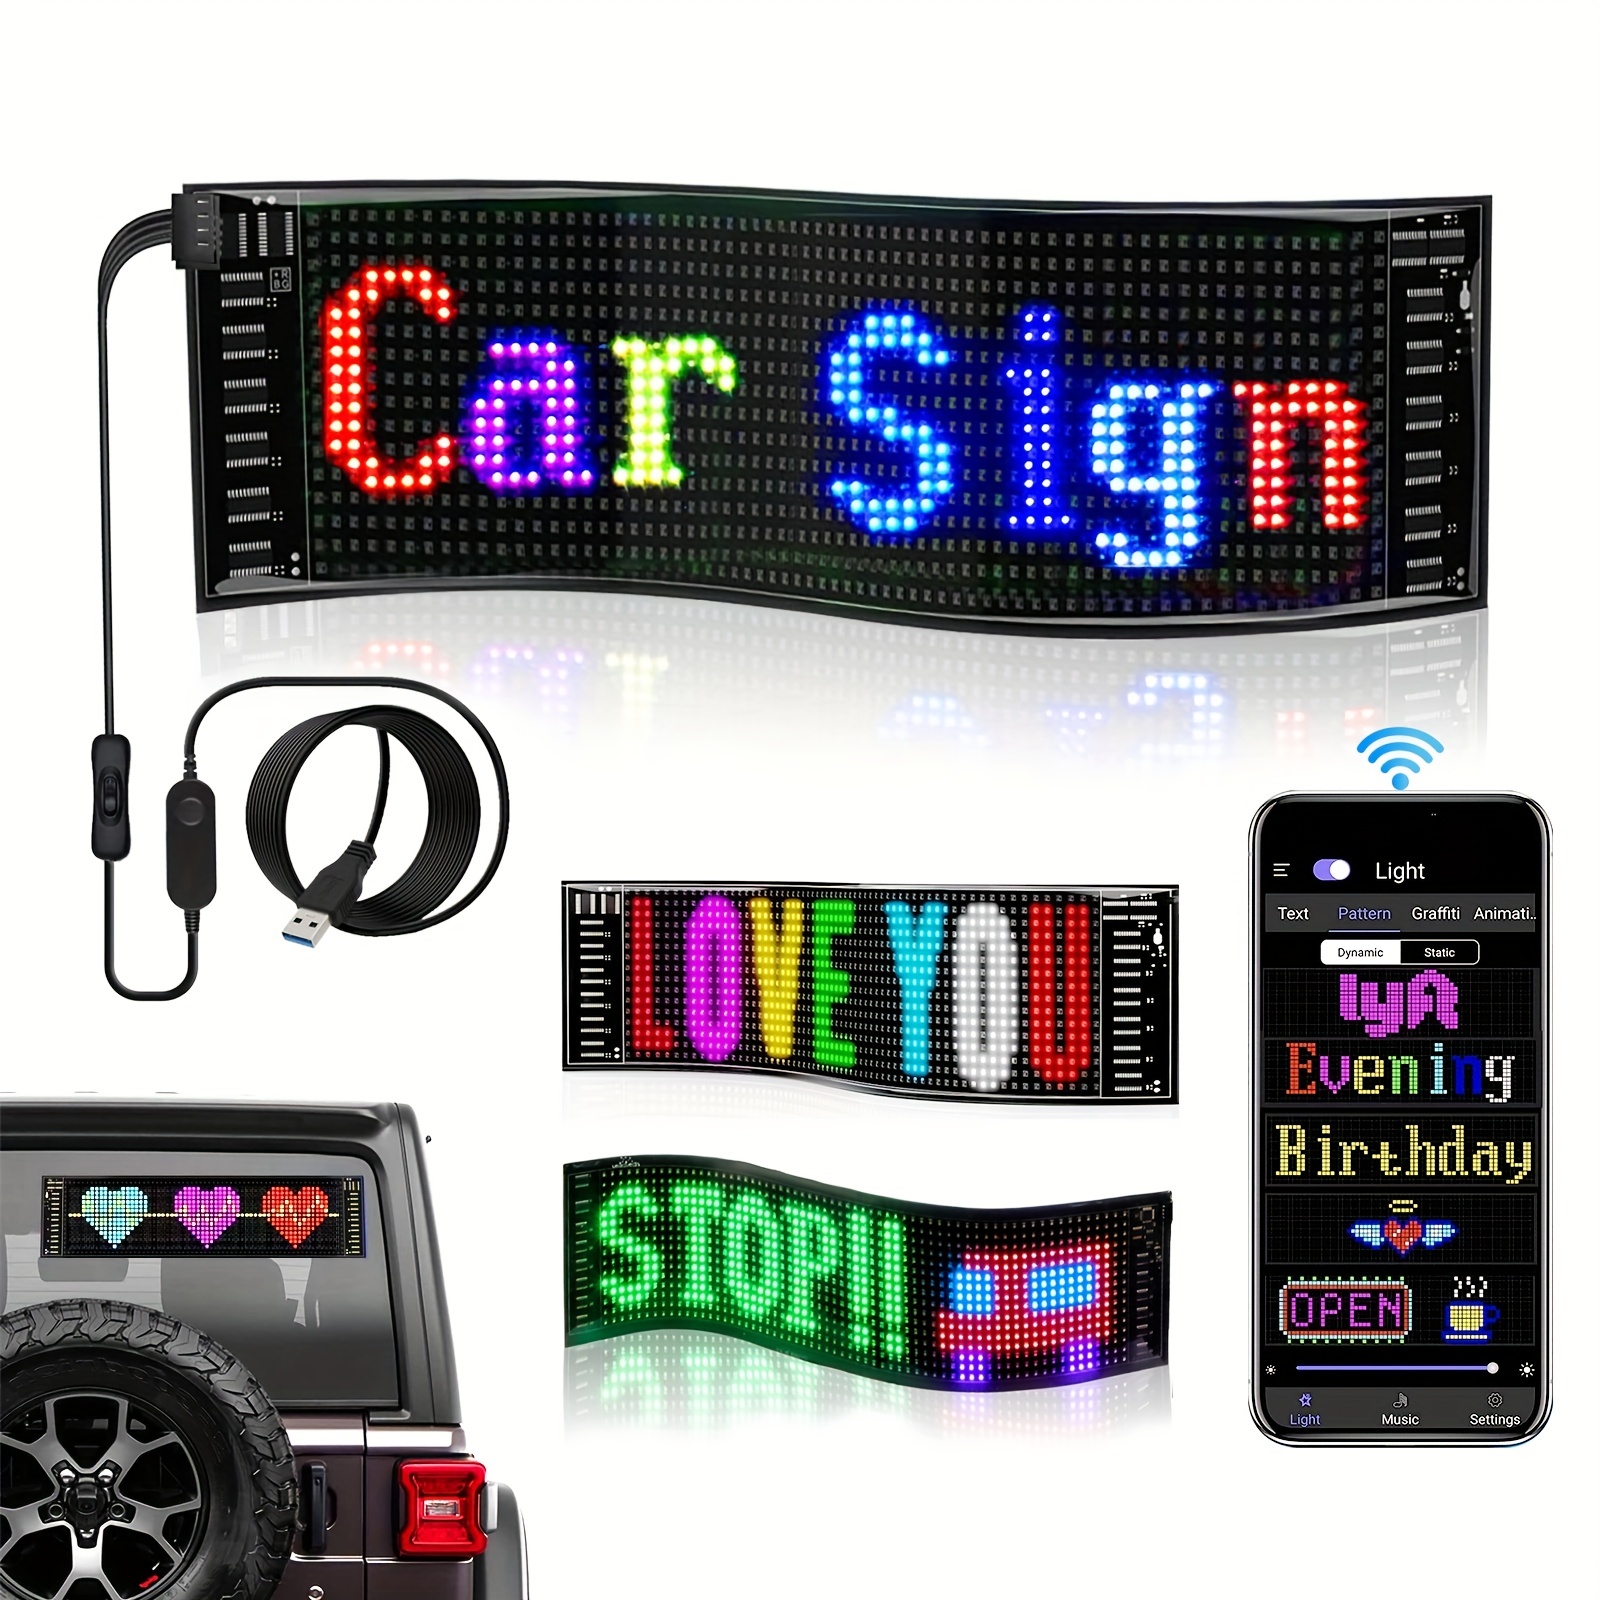 LED Pharmacy Sign, Super Bright Electric Advertising Display Board LED Open - 3